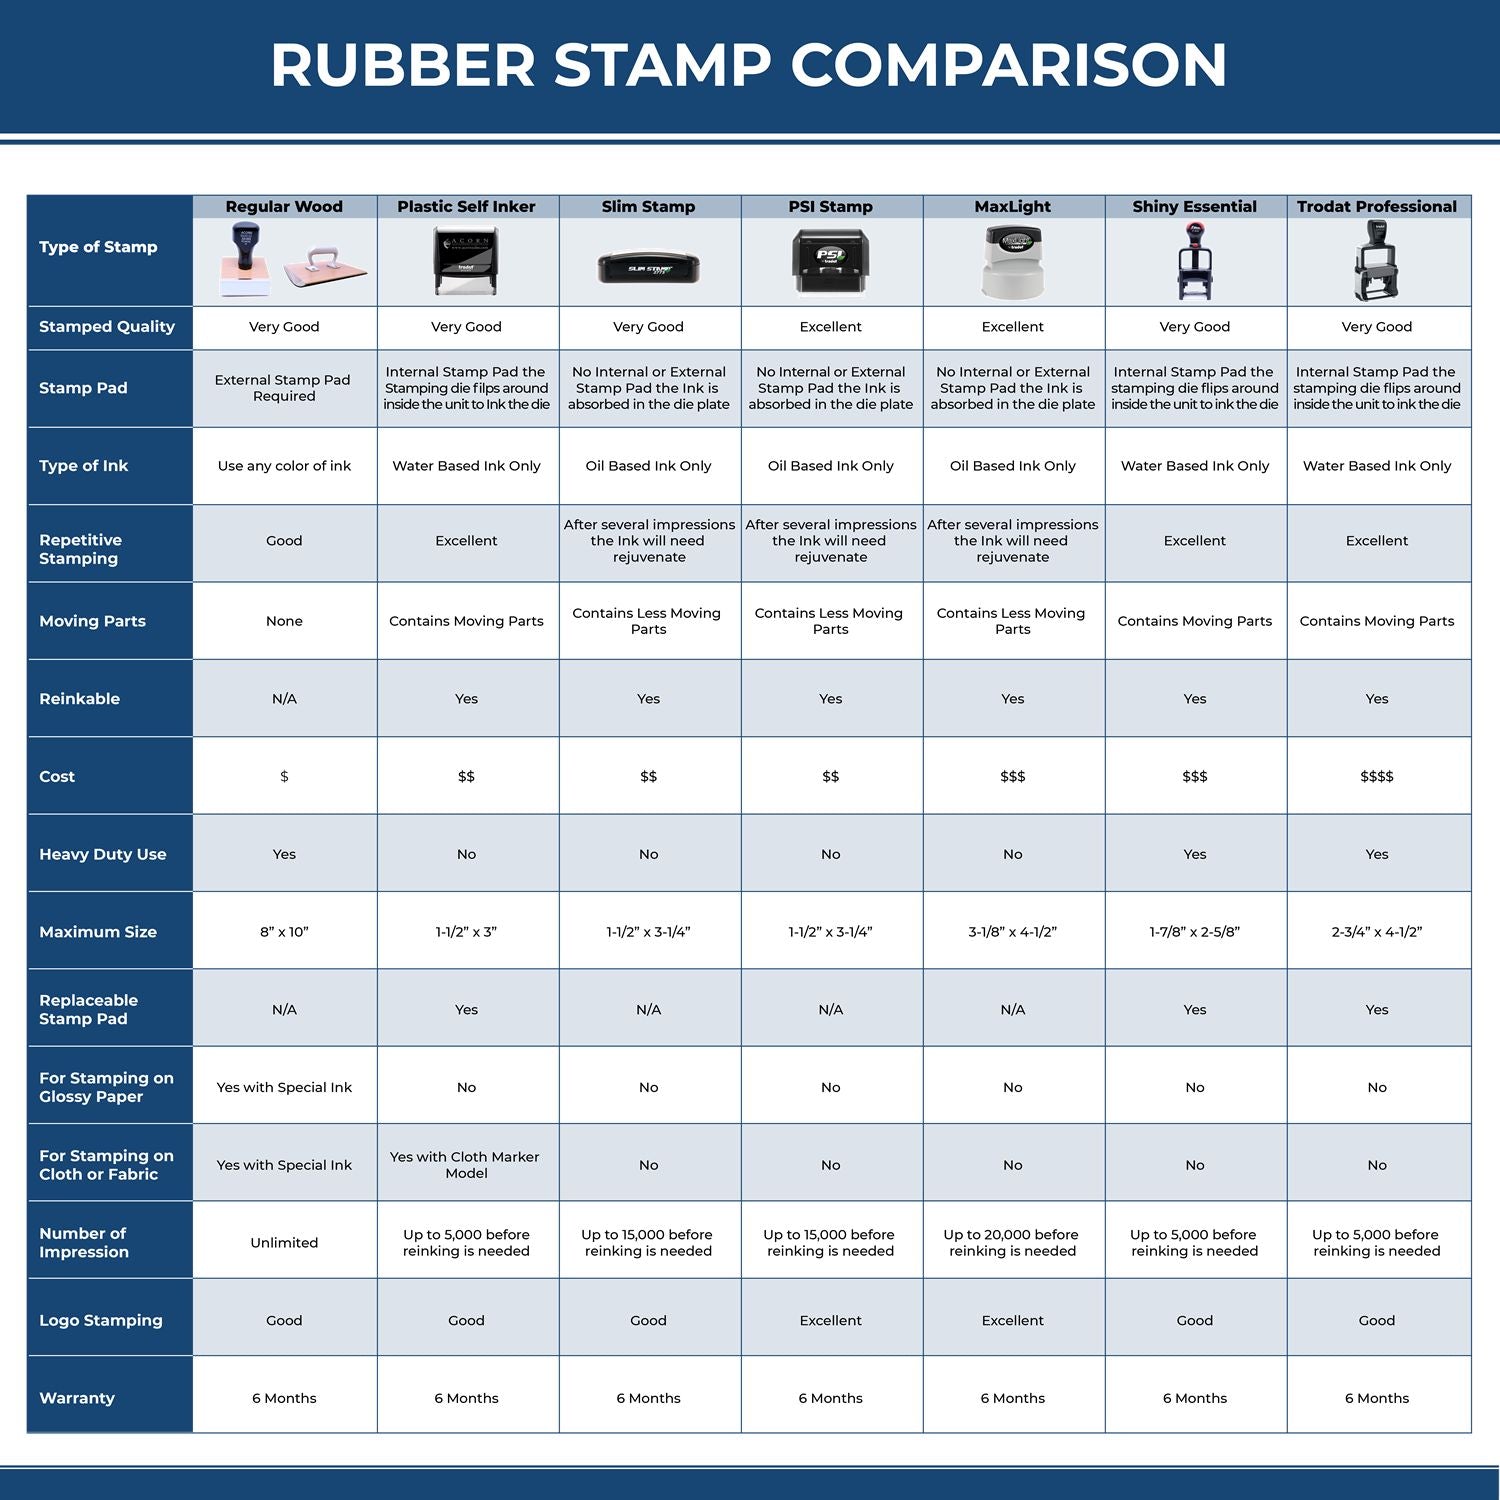 Large Pre-Inked Check Your Work Stamp 5626SLIM Rubber Stamp Comparison